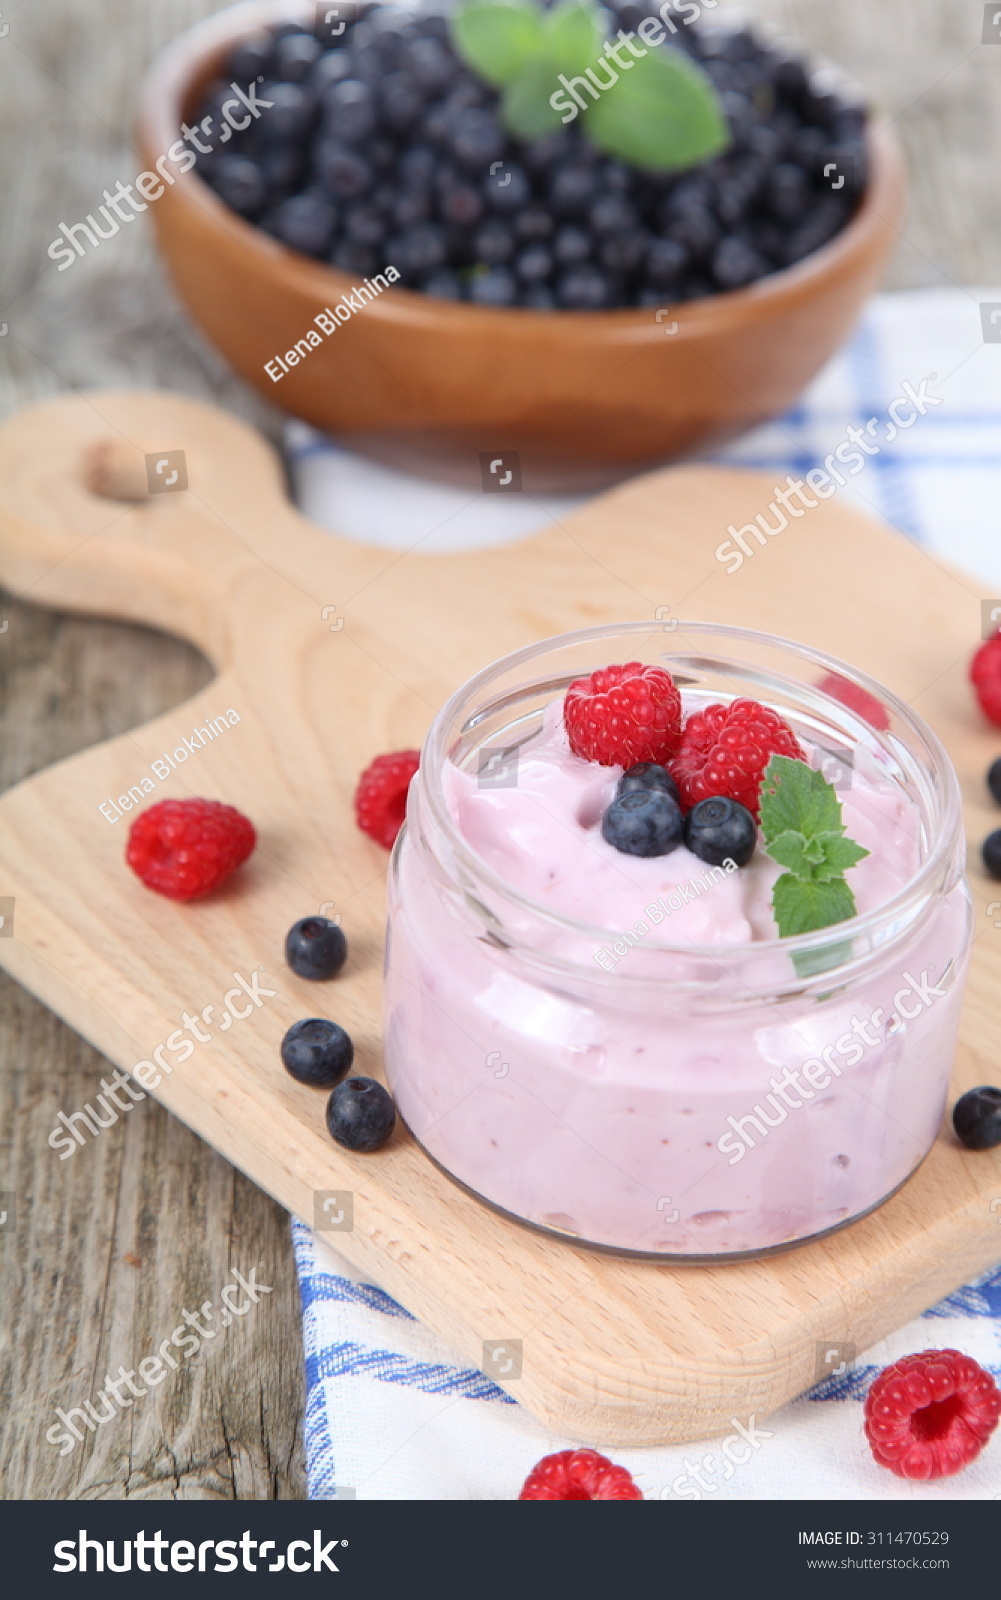 Yogurt and ripe blueberries and raspberries on a wooden table. Summer dessert. #311470529